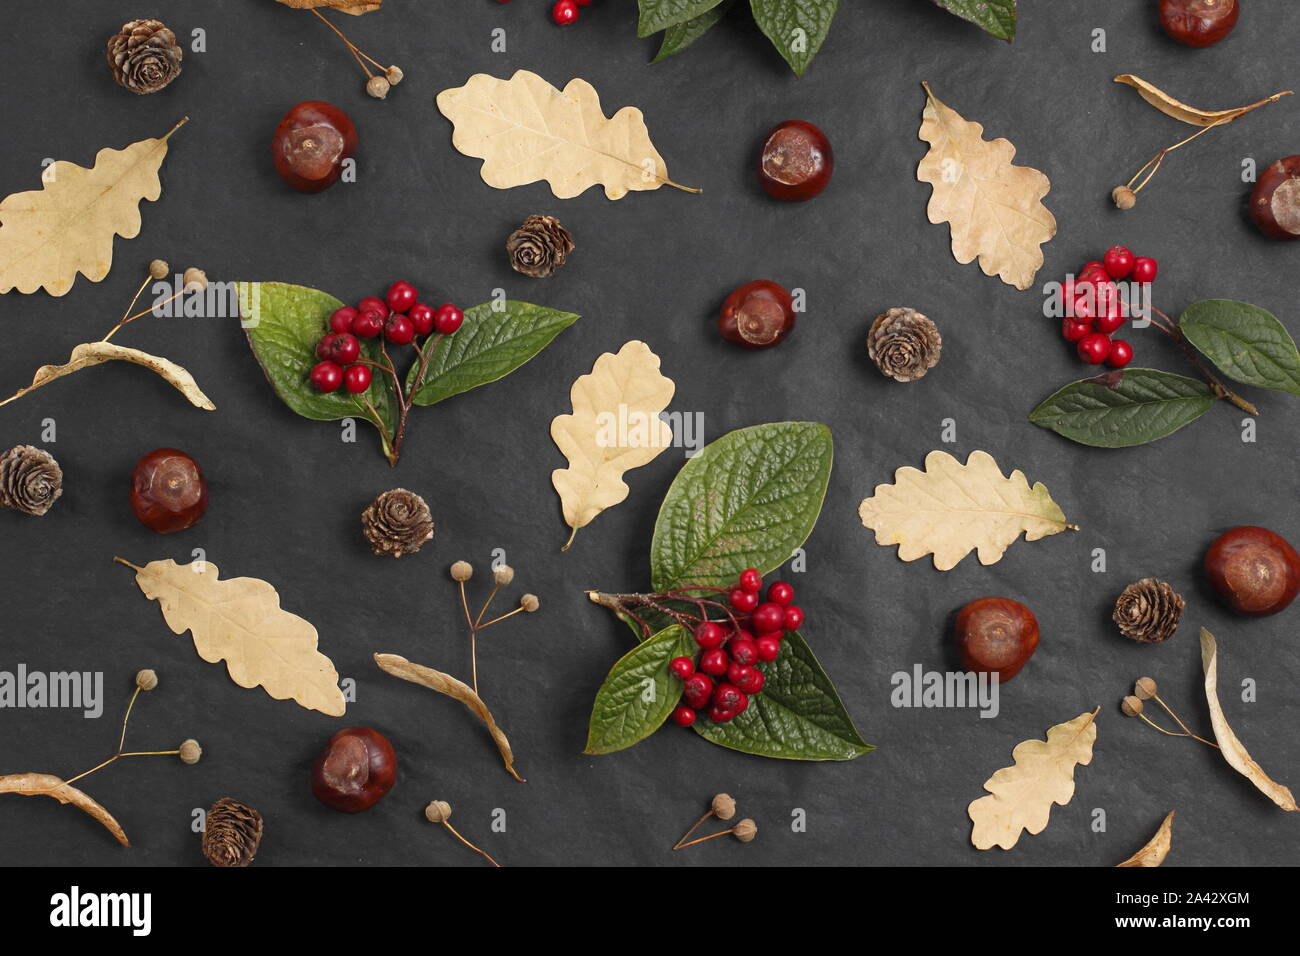 Autumn fruits display - conkers, oak leaves, cotoneaster berries, lime tree (Tilia x europaea) fruits on black background. UK Stock Photo